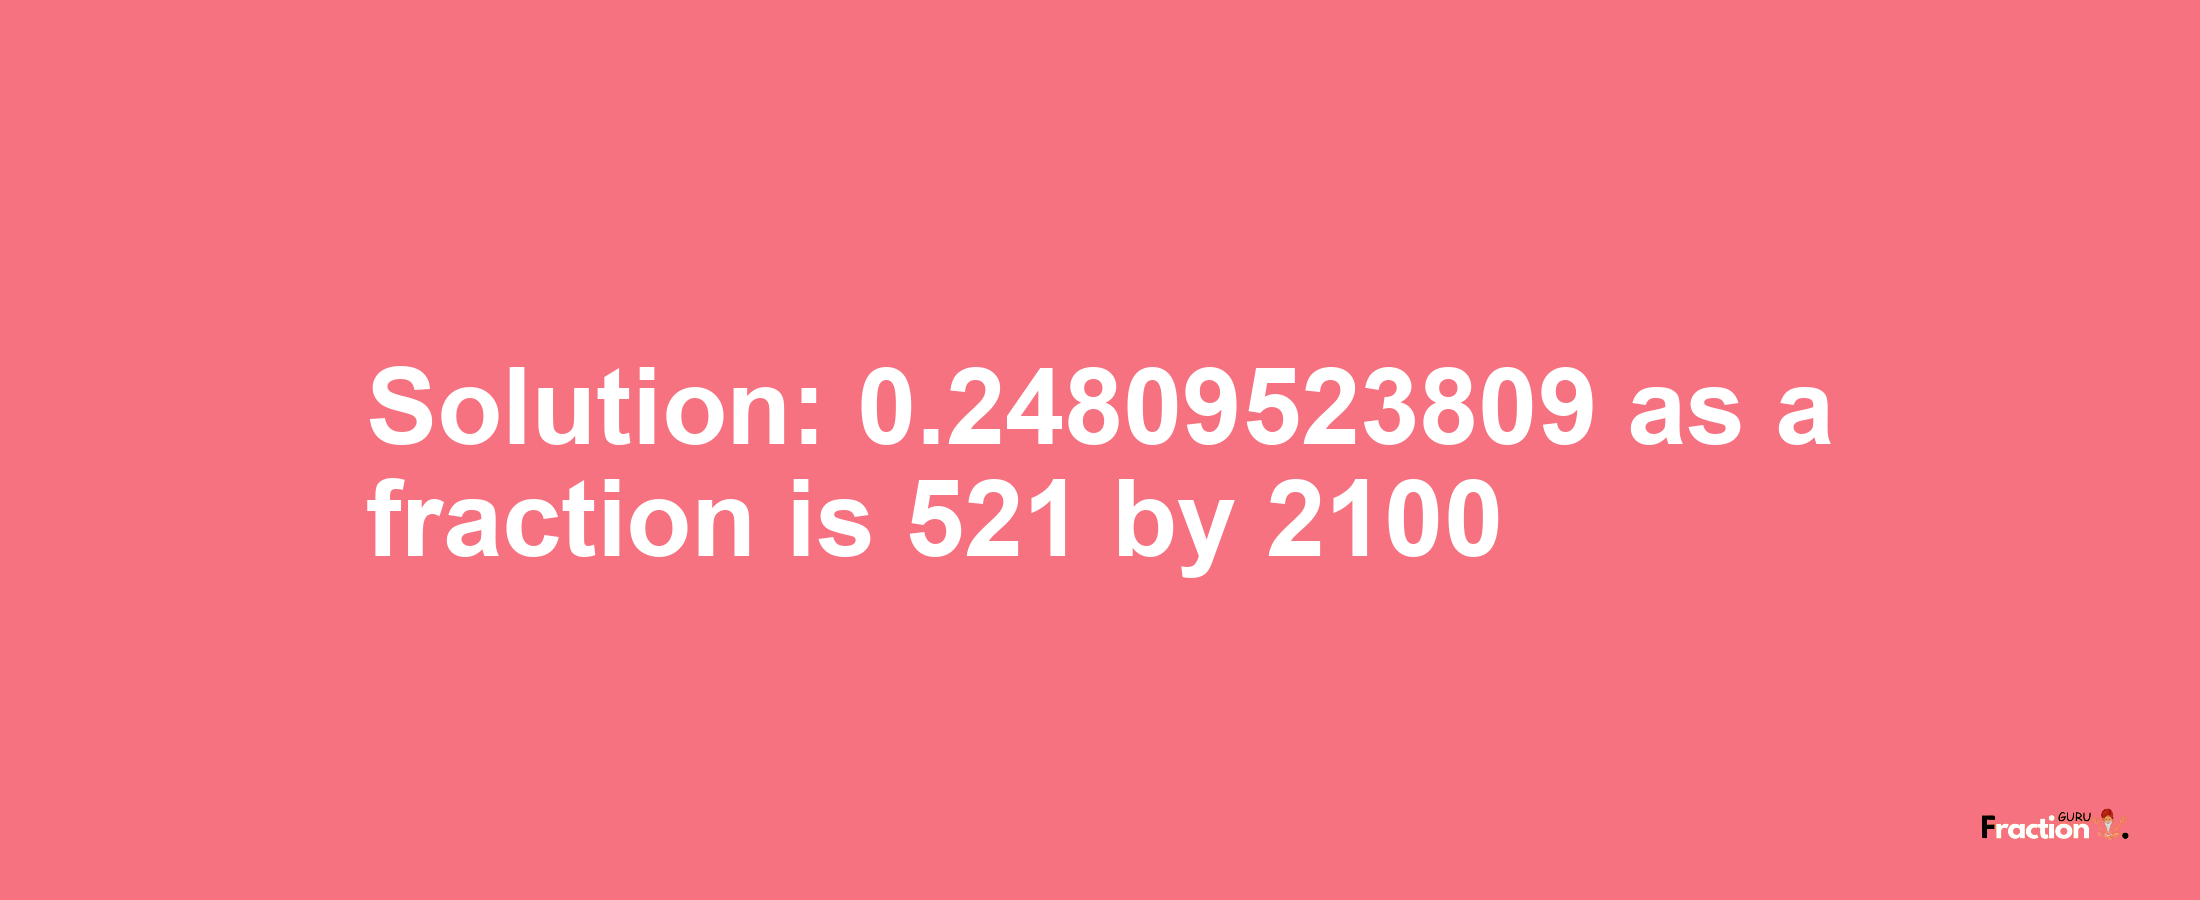 Solution:0.24809523809 as a fraction is 521/2100